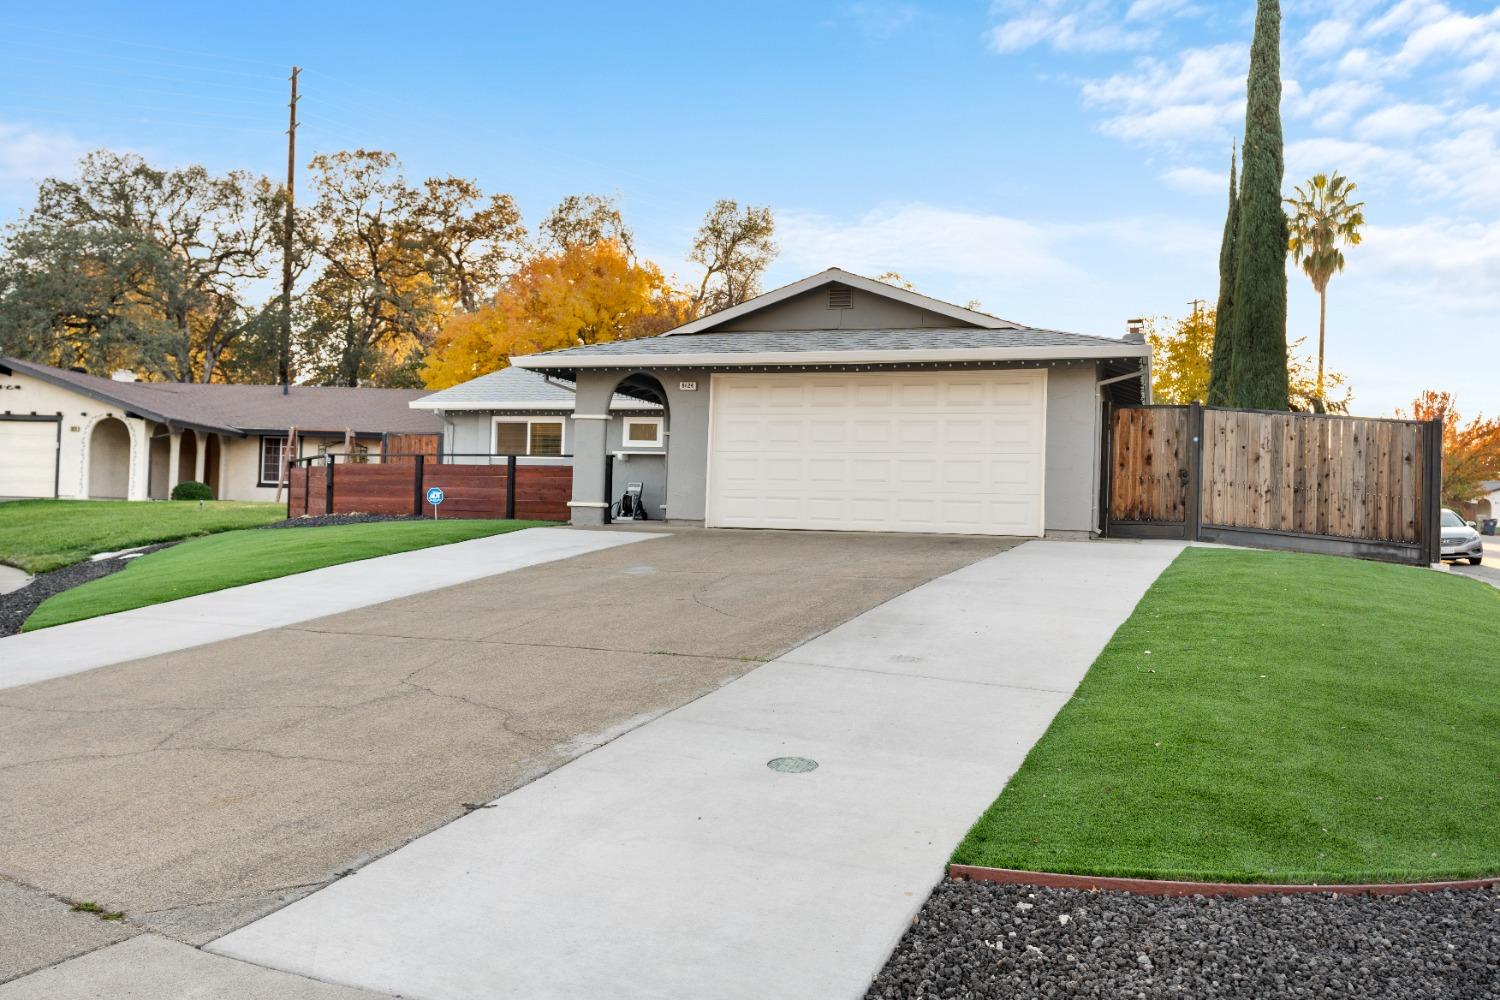 Recently updated Citrus Heights 3 bedroom, 2 bath home in an excellent location near parks and shopp